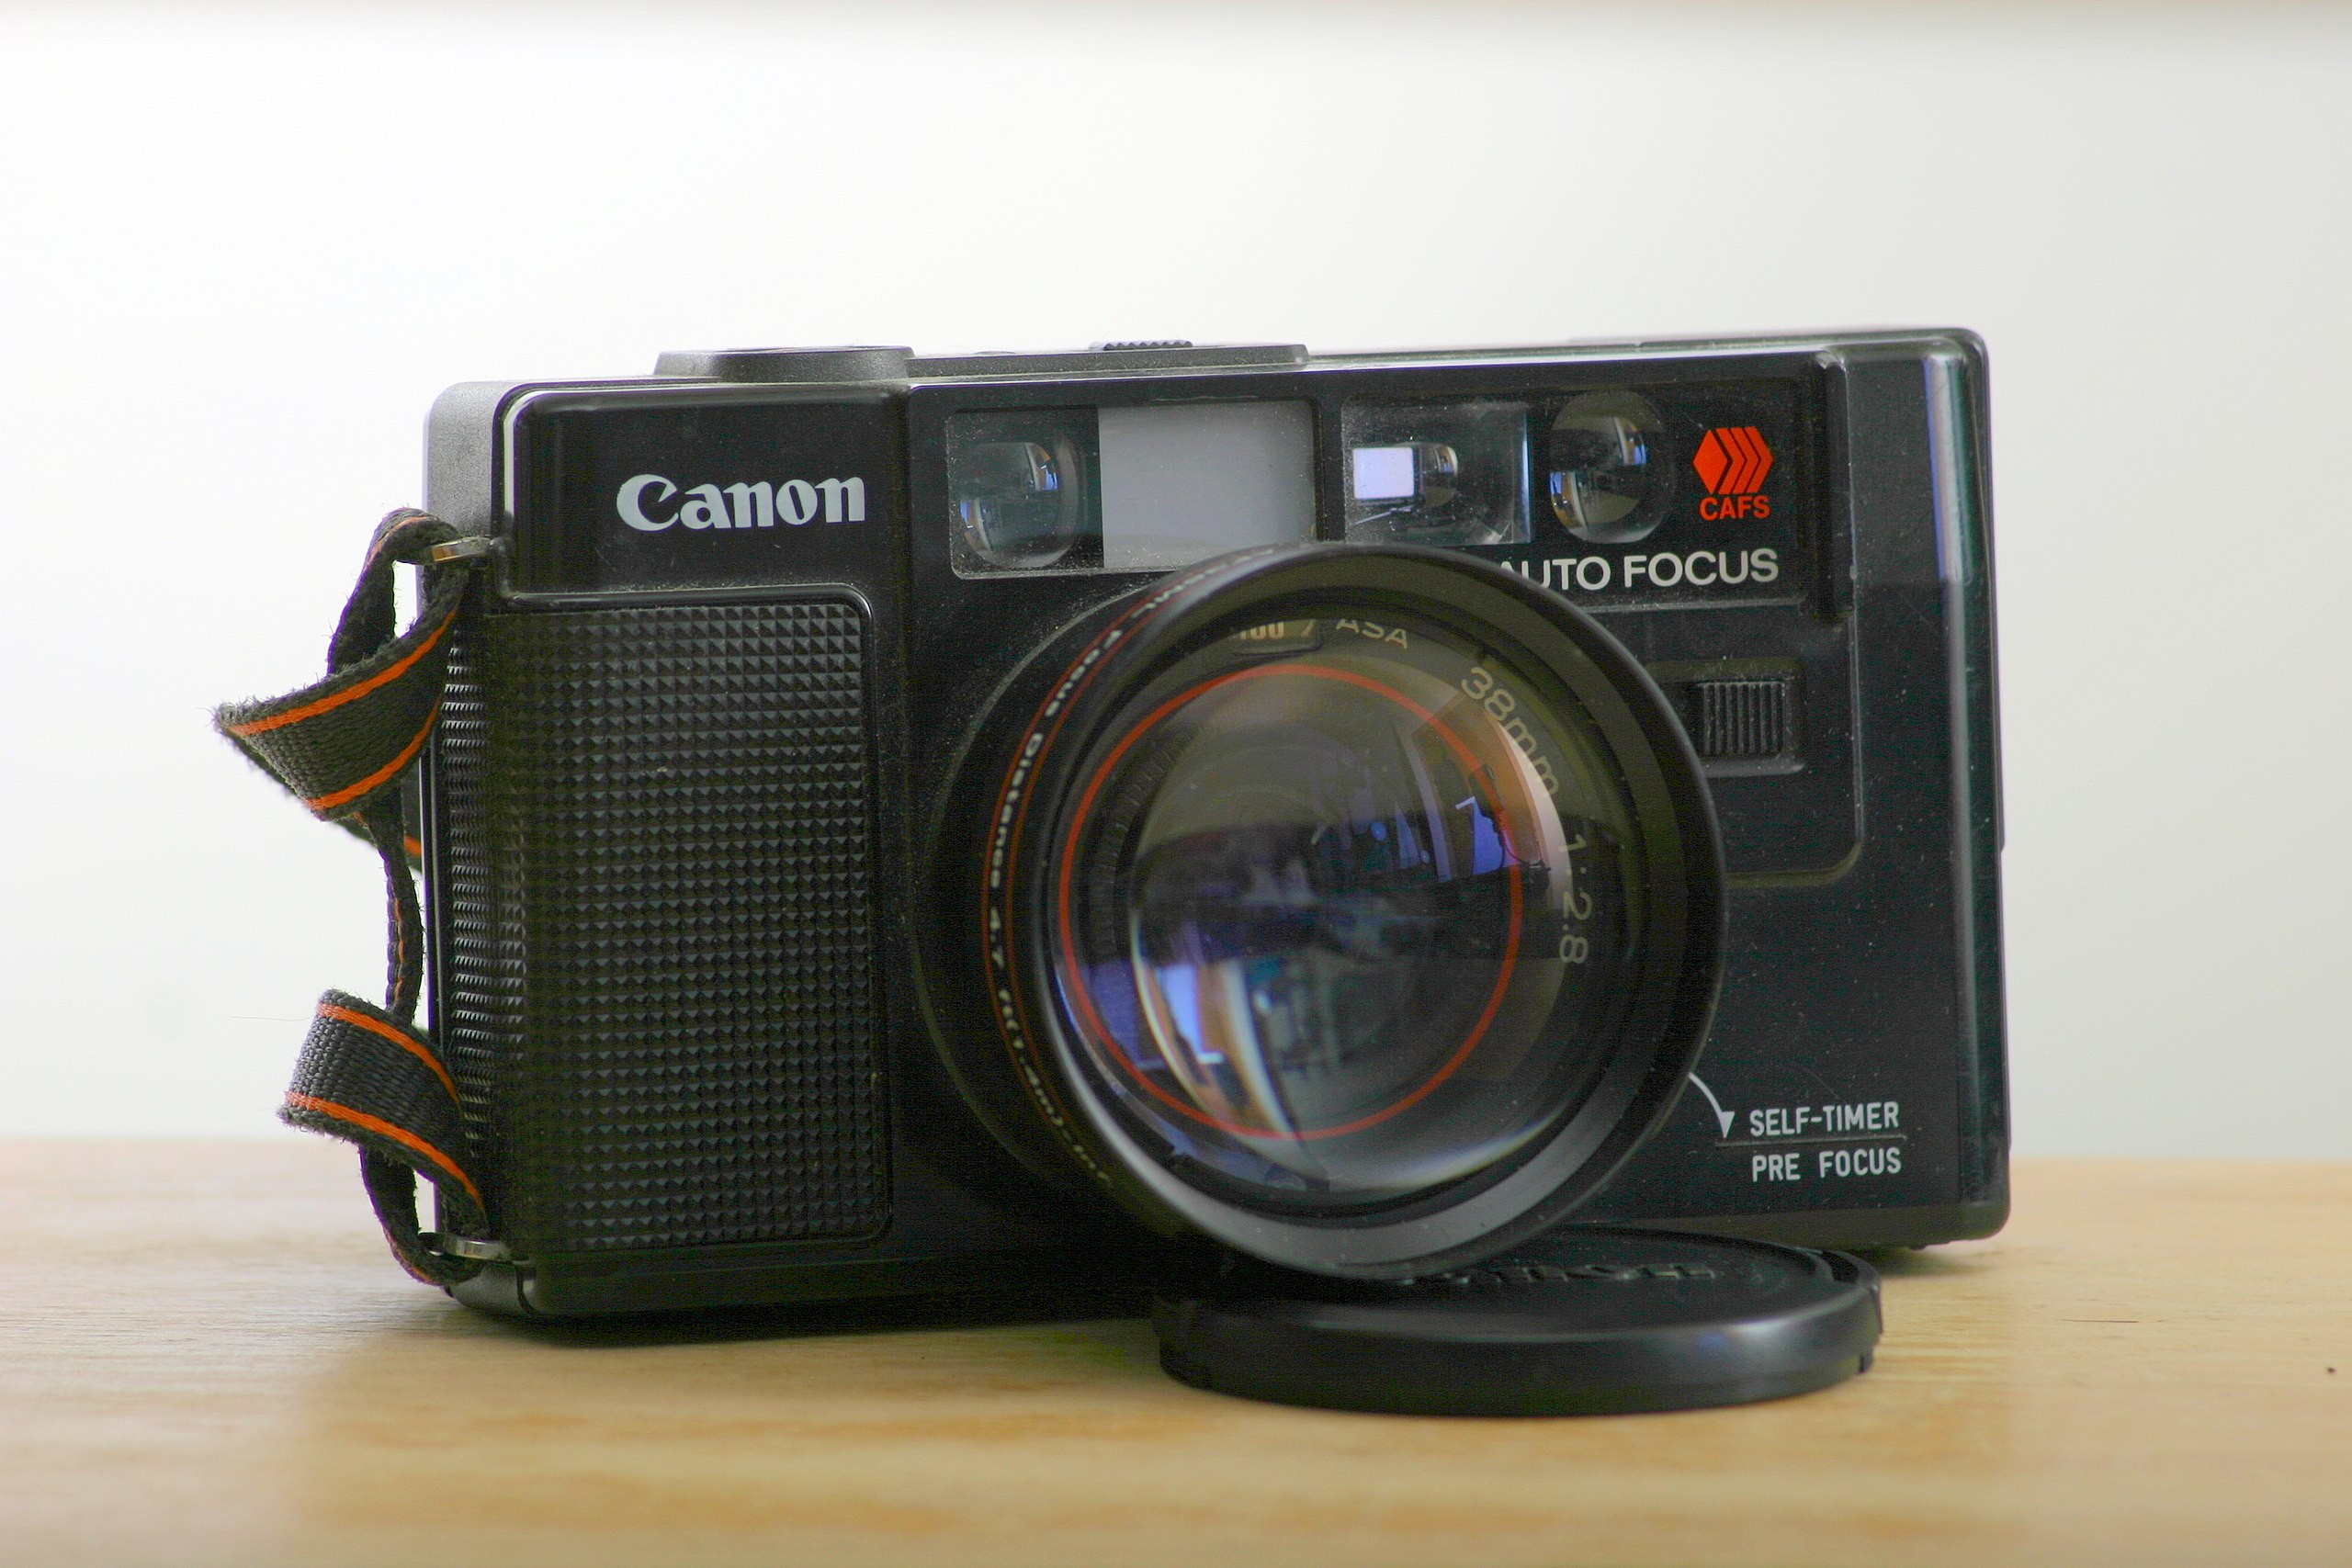 File:Canon AF35M (2009).jpg - Wikimedia Commons